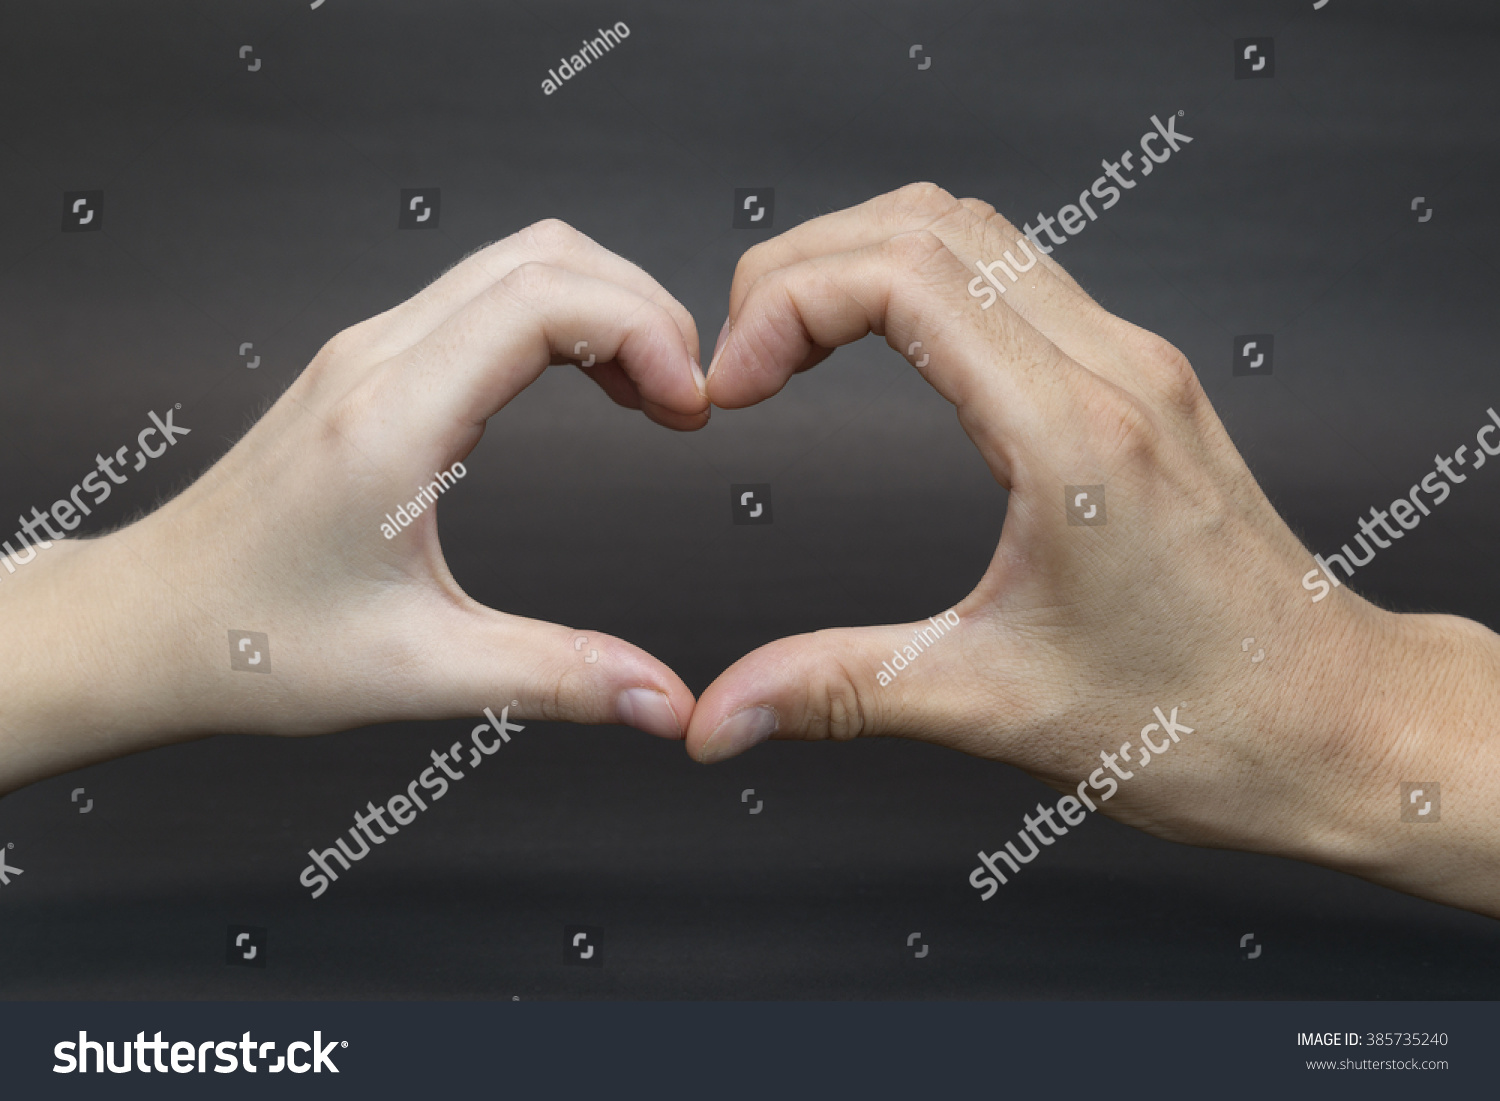 Hands shaped in heart on black background #385735240